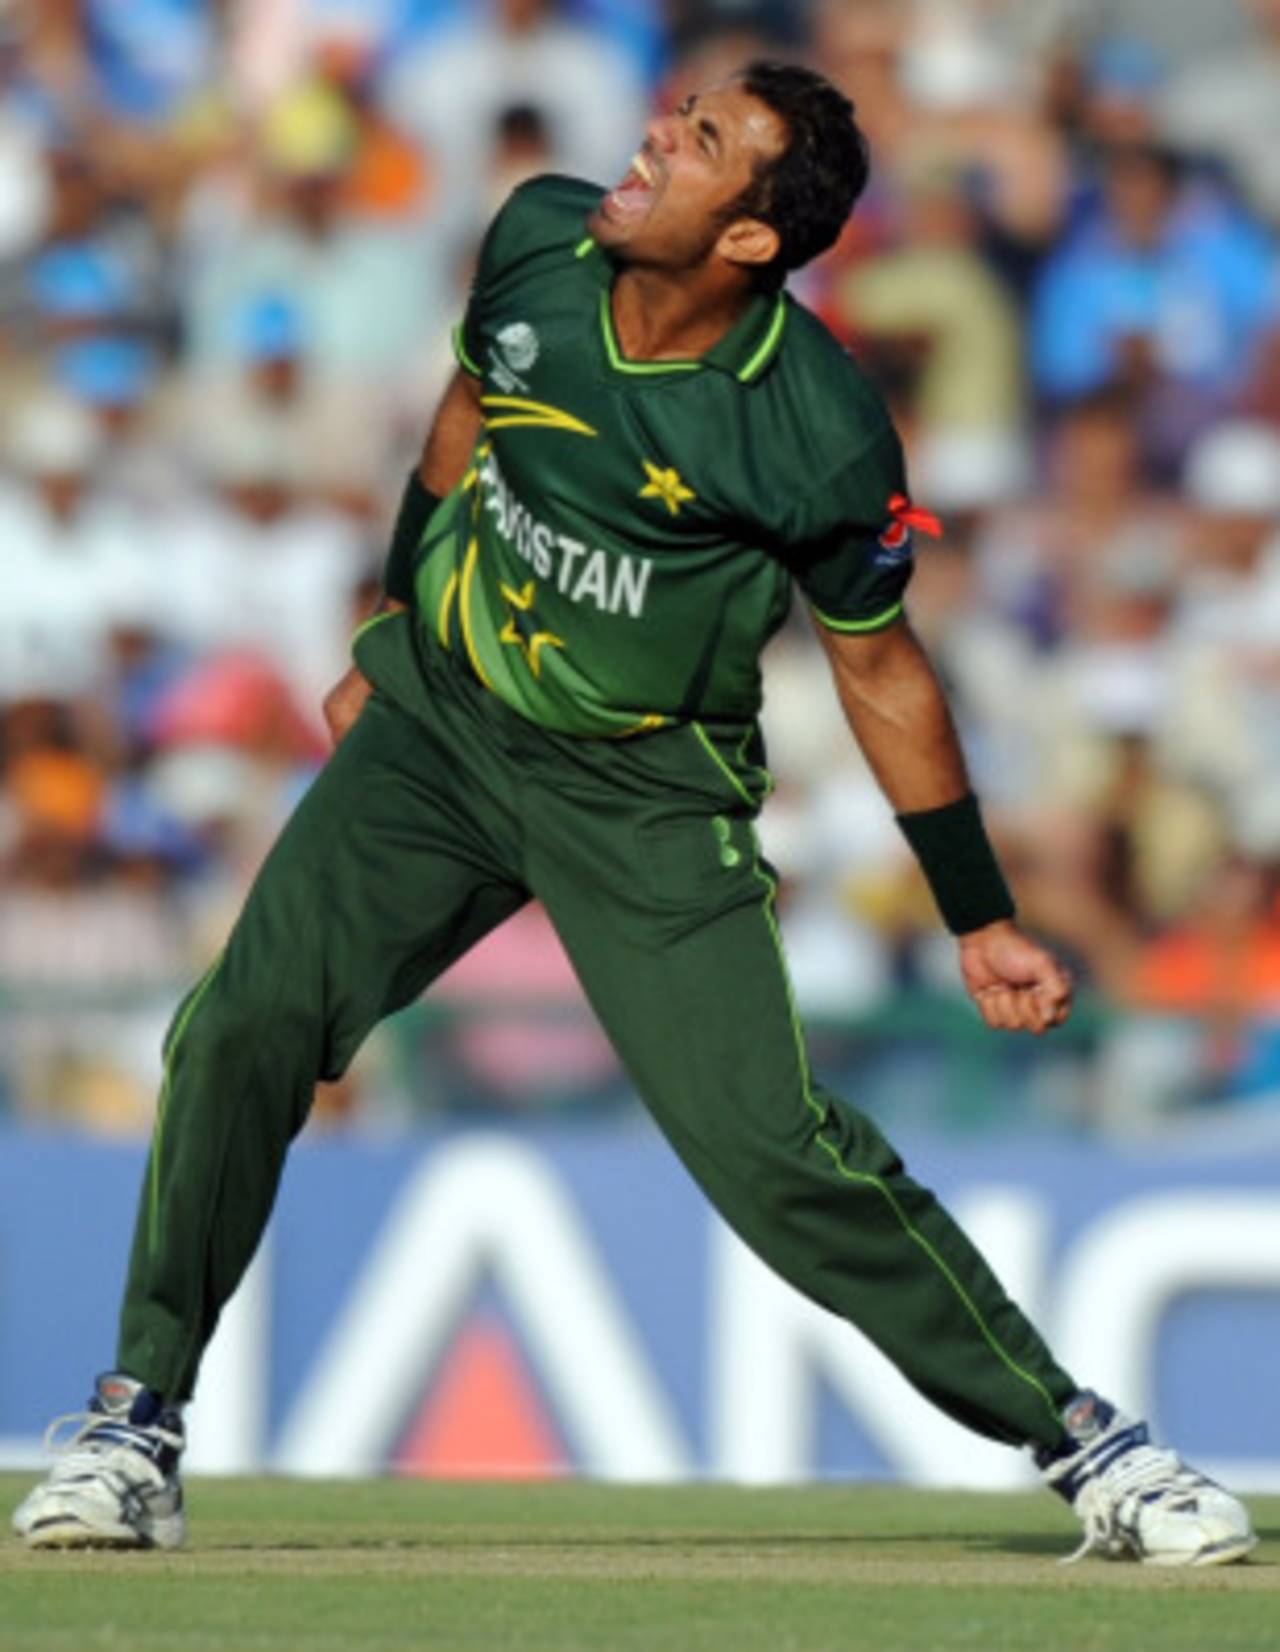 Wahab Riaz claimed his maiden ODI five-for, India v Pakistan, 2nd semi-final, World Cup 2011, Mohali, March 30, 2011